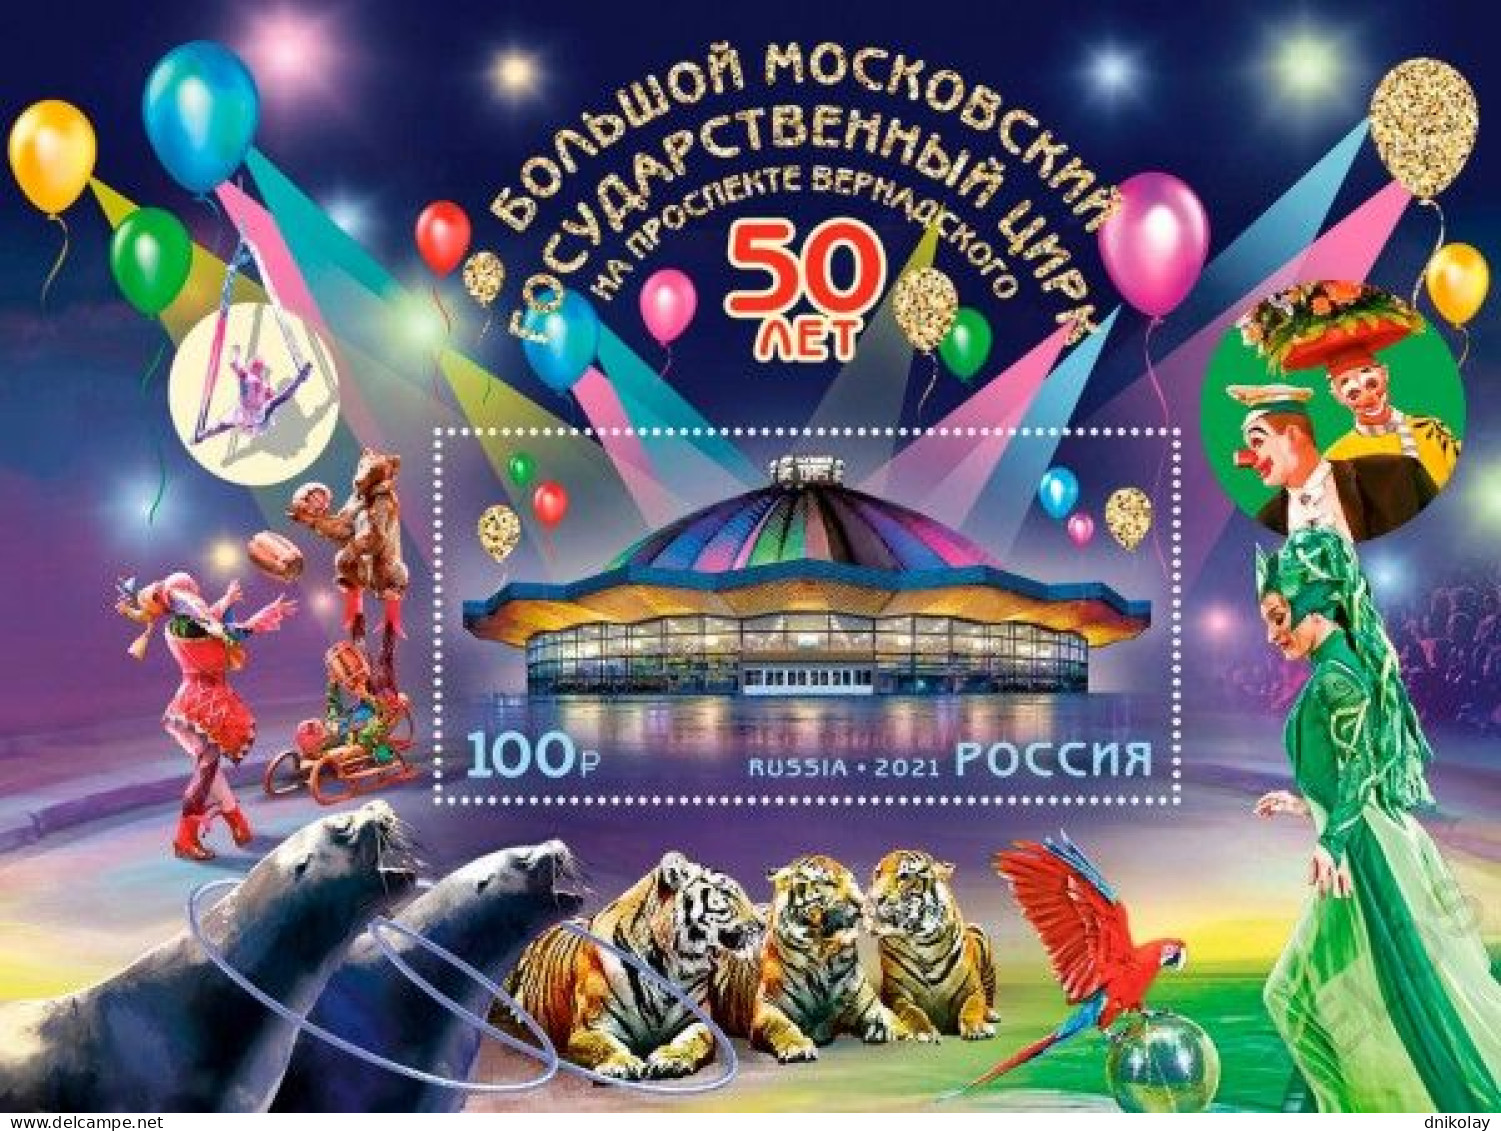 2021 3008 Russia Booklet The 50th Anniversary Of The Great Moscow State Circus On Vernadsky Avenue MNH - Ongebruikt